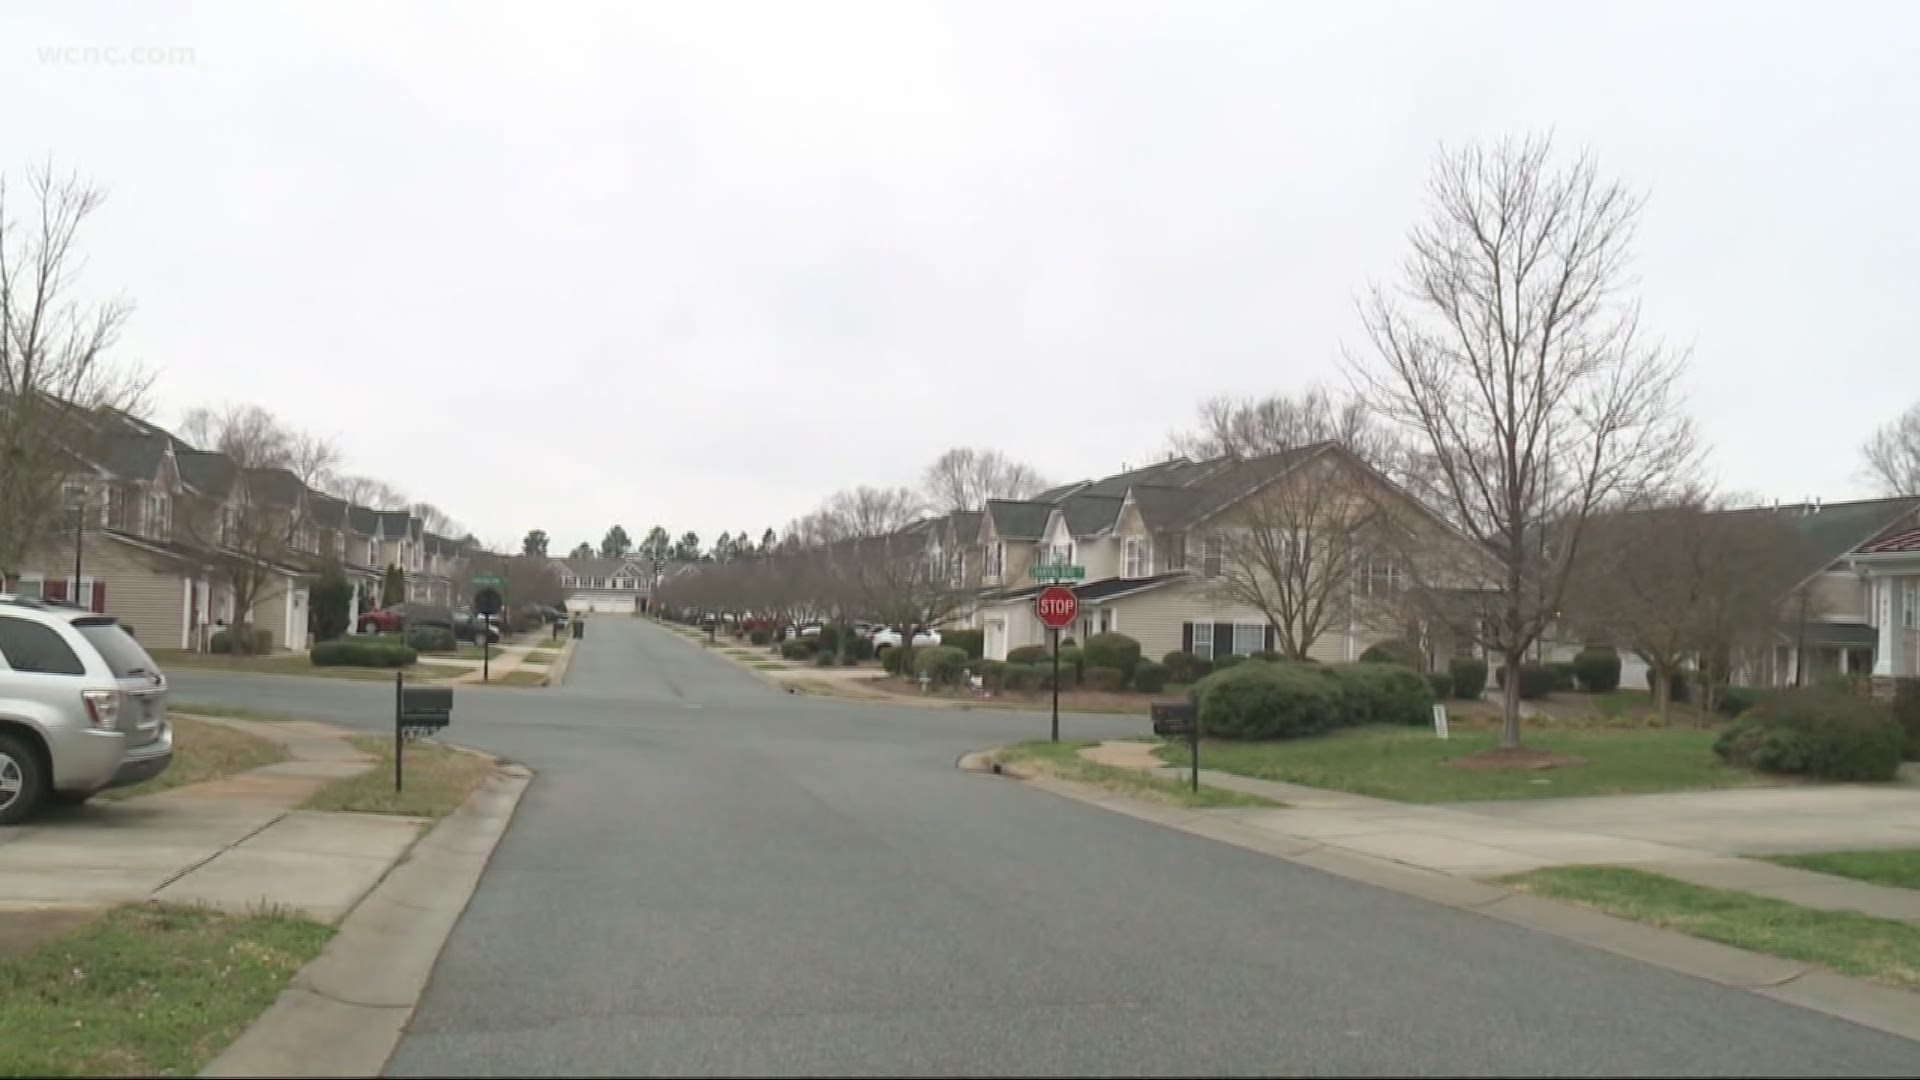 A child said a stranger approached him in the Millwood Plantation neighborhood, offered him money, and tried to get him in his car.